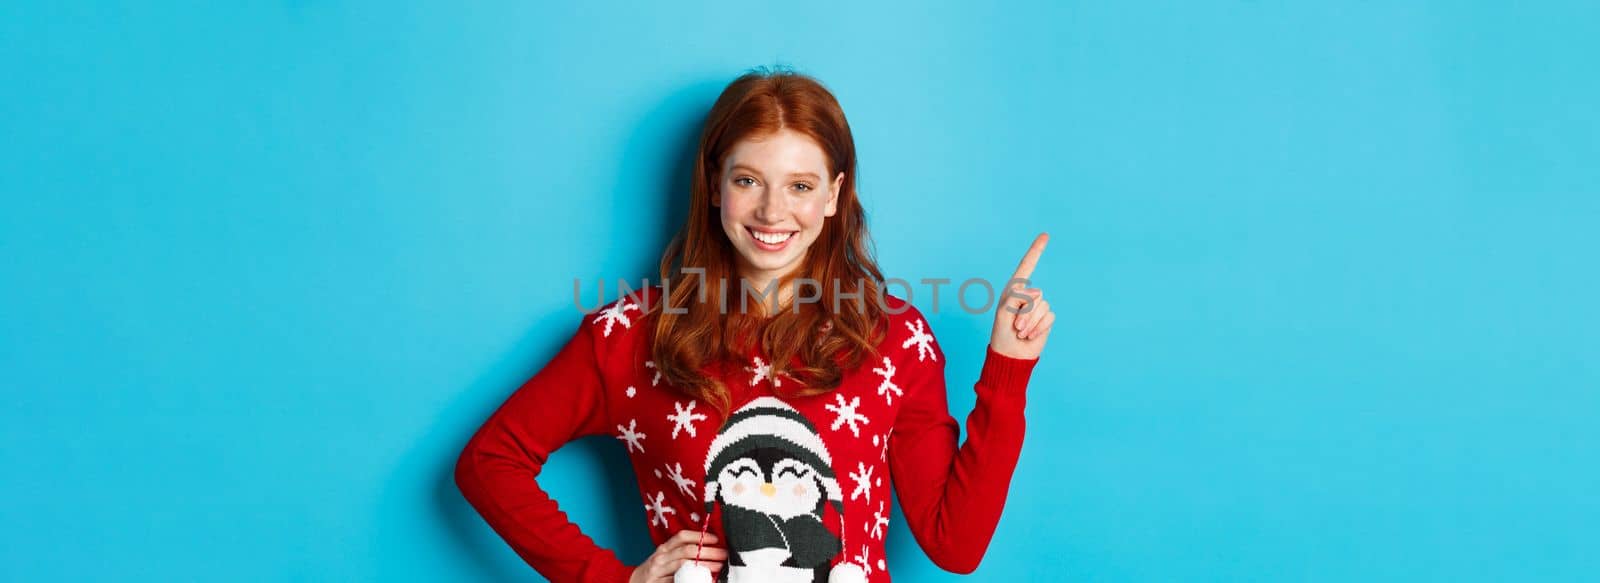 Winter holidays and Christmas Eve concept. Cute teenage girl with red wavy hair, pointing upper left corner and smiling at camera, standing over blue background.